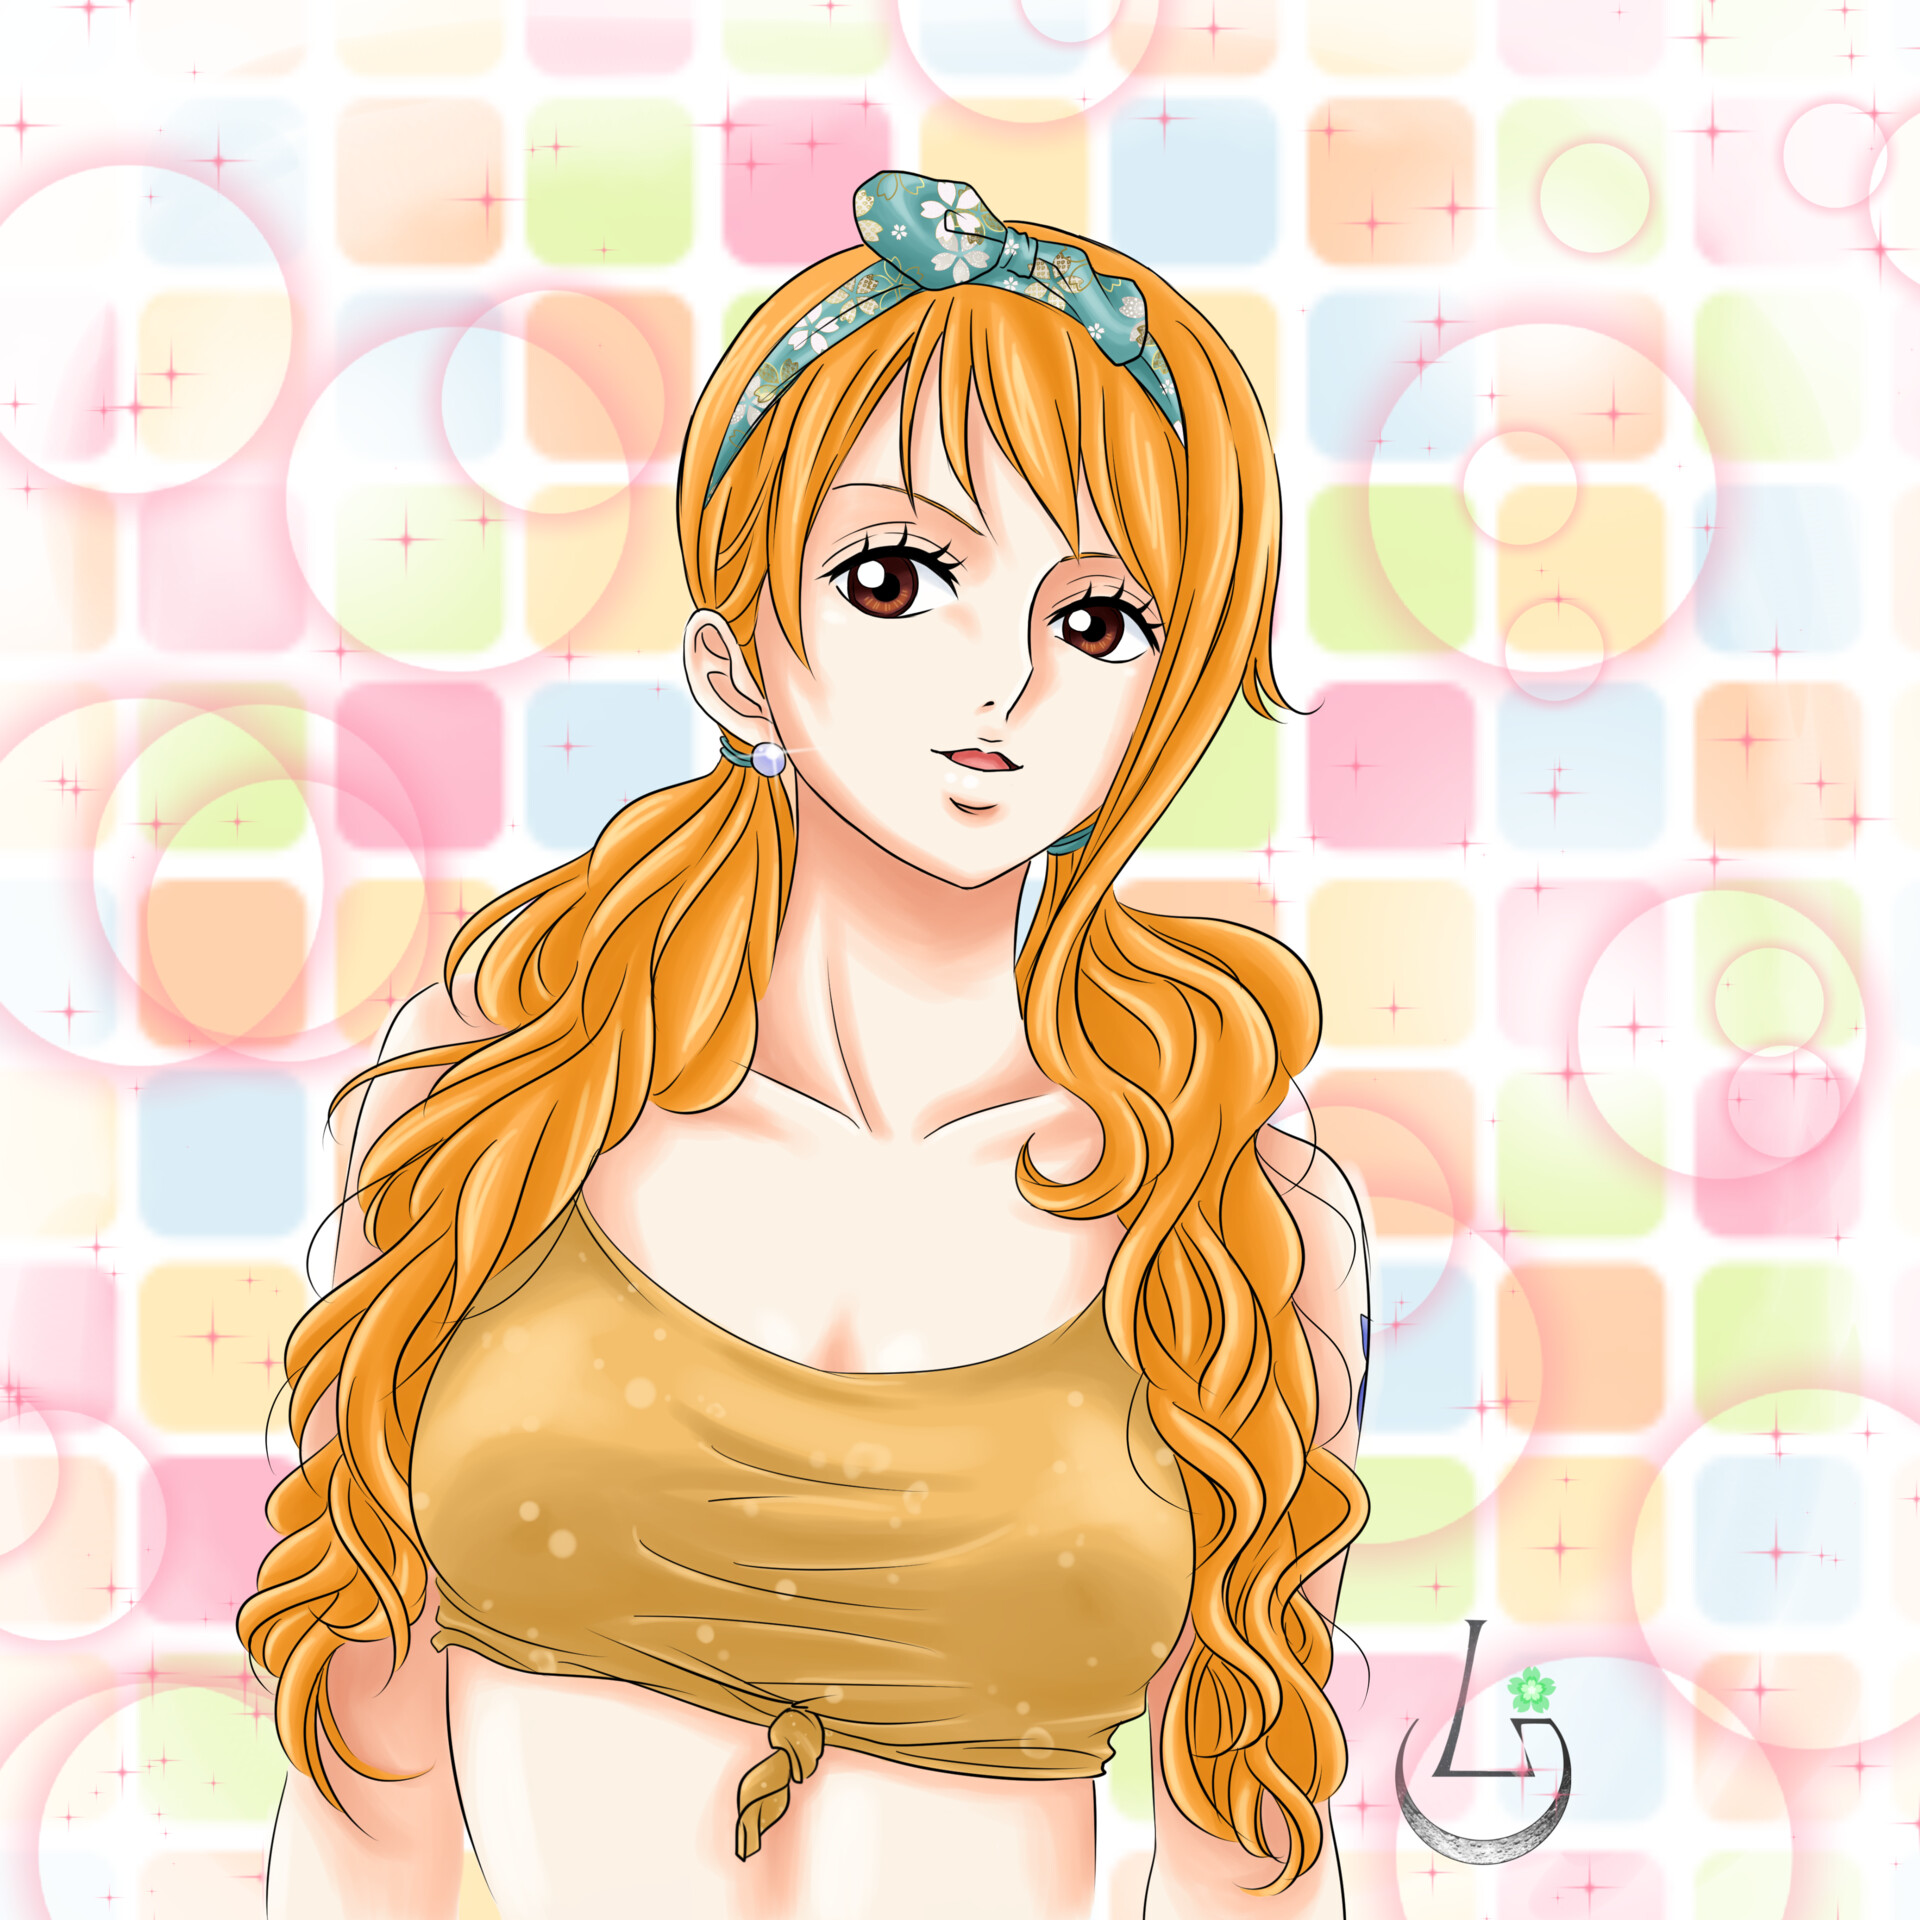 Fan art of Nami from the manga and anime "One Piece" by E...